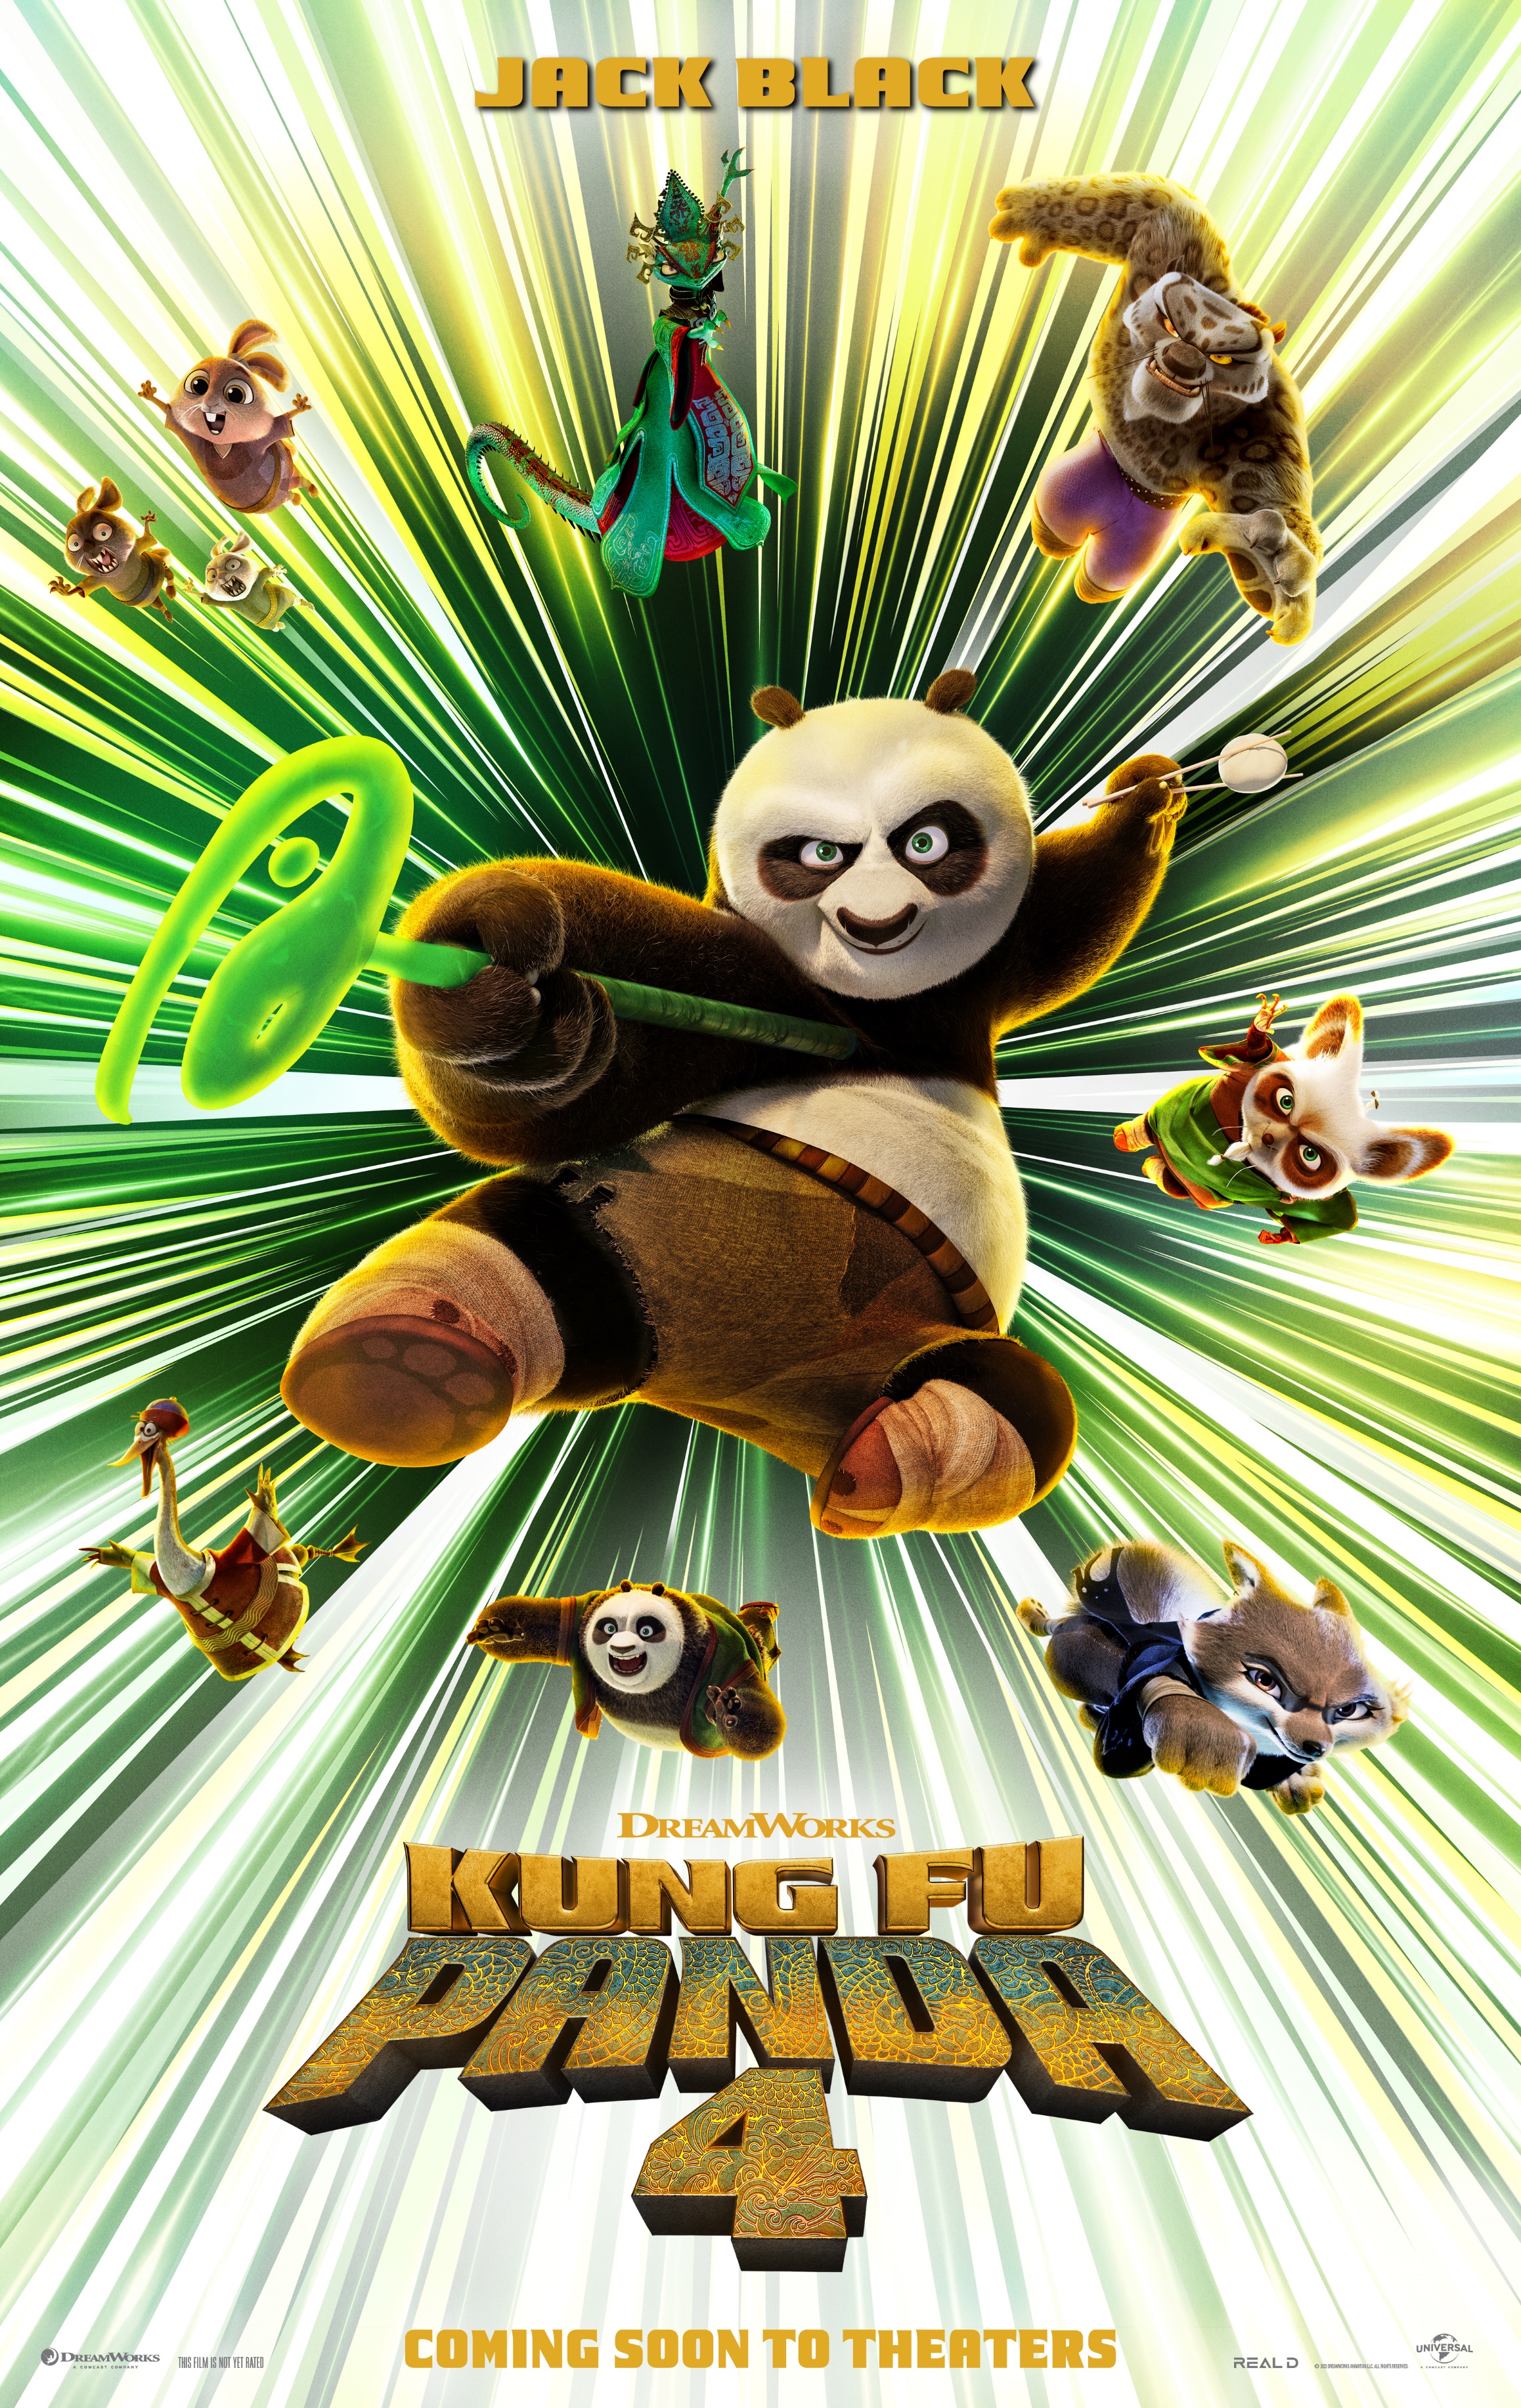 <p>Po is back for the first time in nearly a decade! "Kung Fu Panda 4" may not have performed as well with critics as its predecessors, scoring a decent but not great 72% fresh rating on Rotten Tomatoes, but that didn't stop fans of the long-running animated film franchise from turning out in droves to catch the latest installment in theaters. It banked more than $450M at the box office after it opened in March, making it the second highest-grossing Hollywood film of the year so far after just "Dune: Part 2."</p>